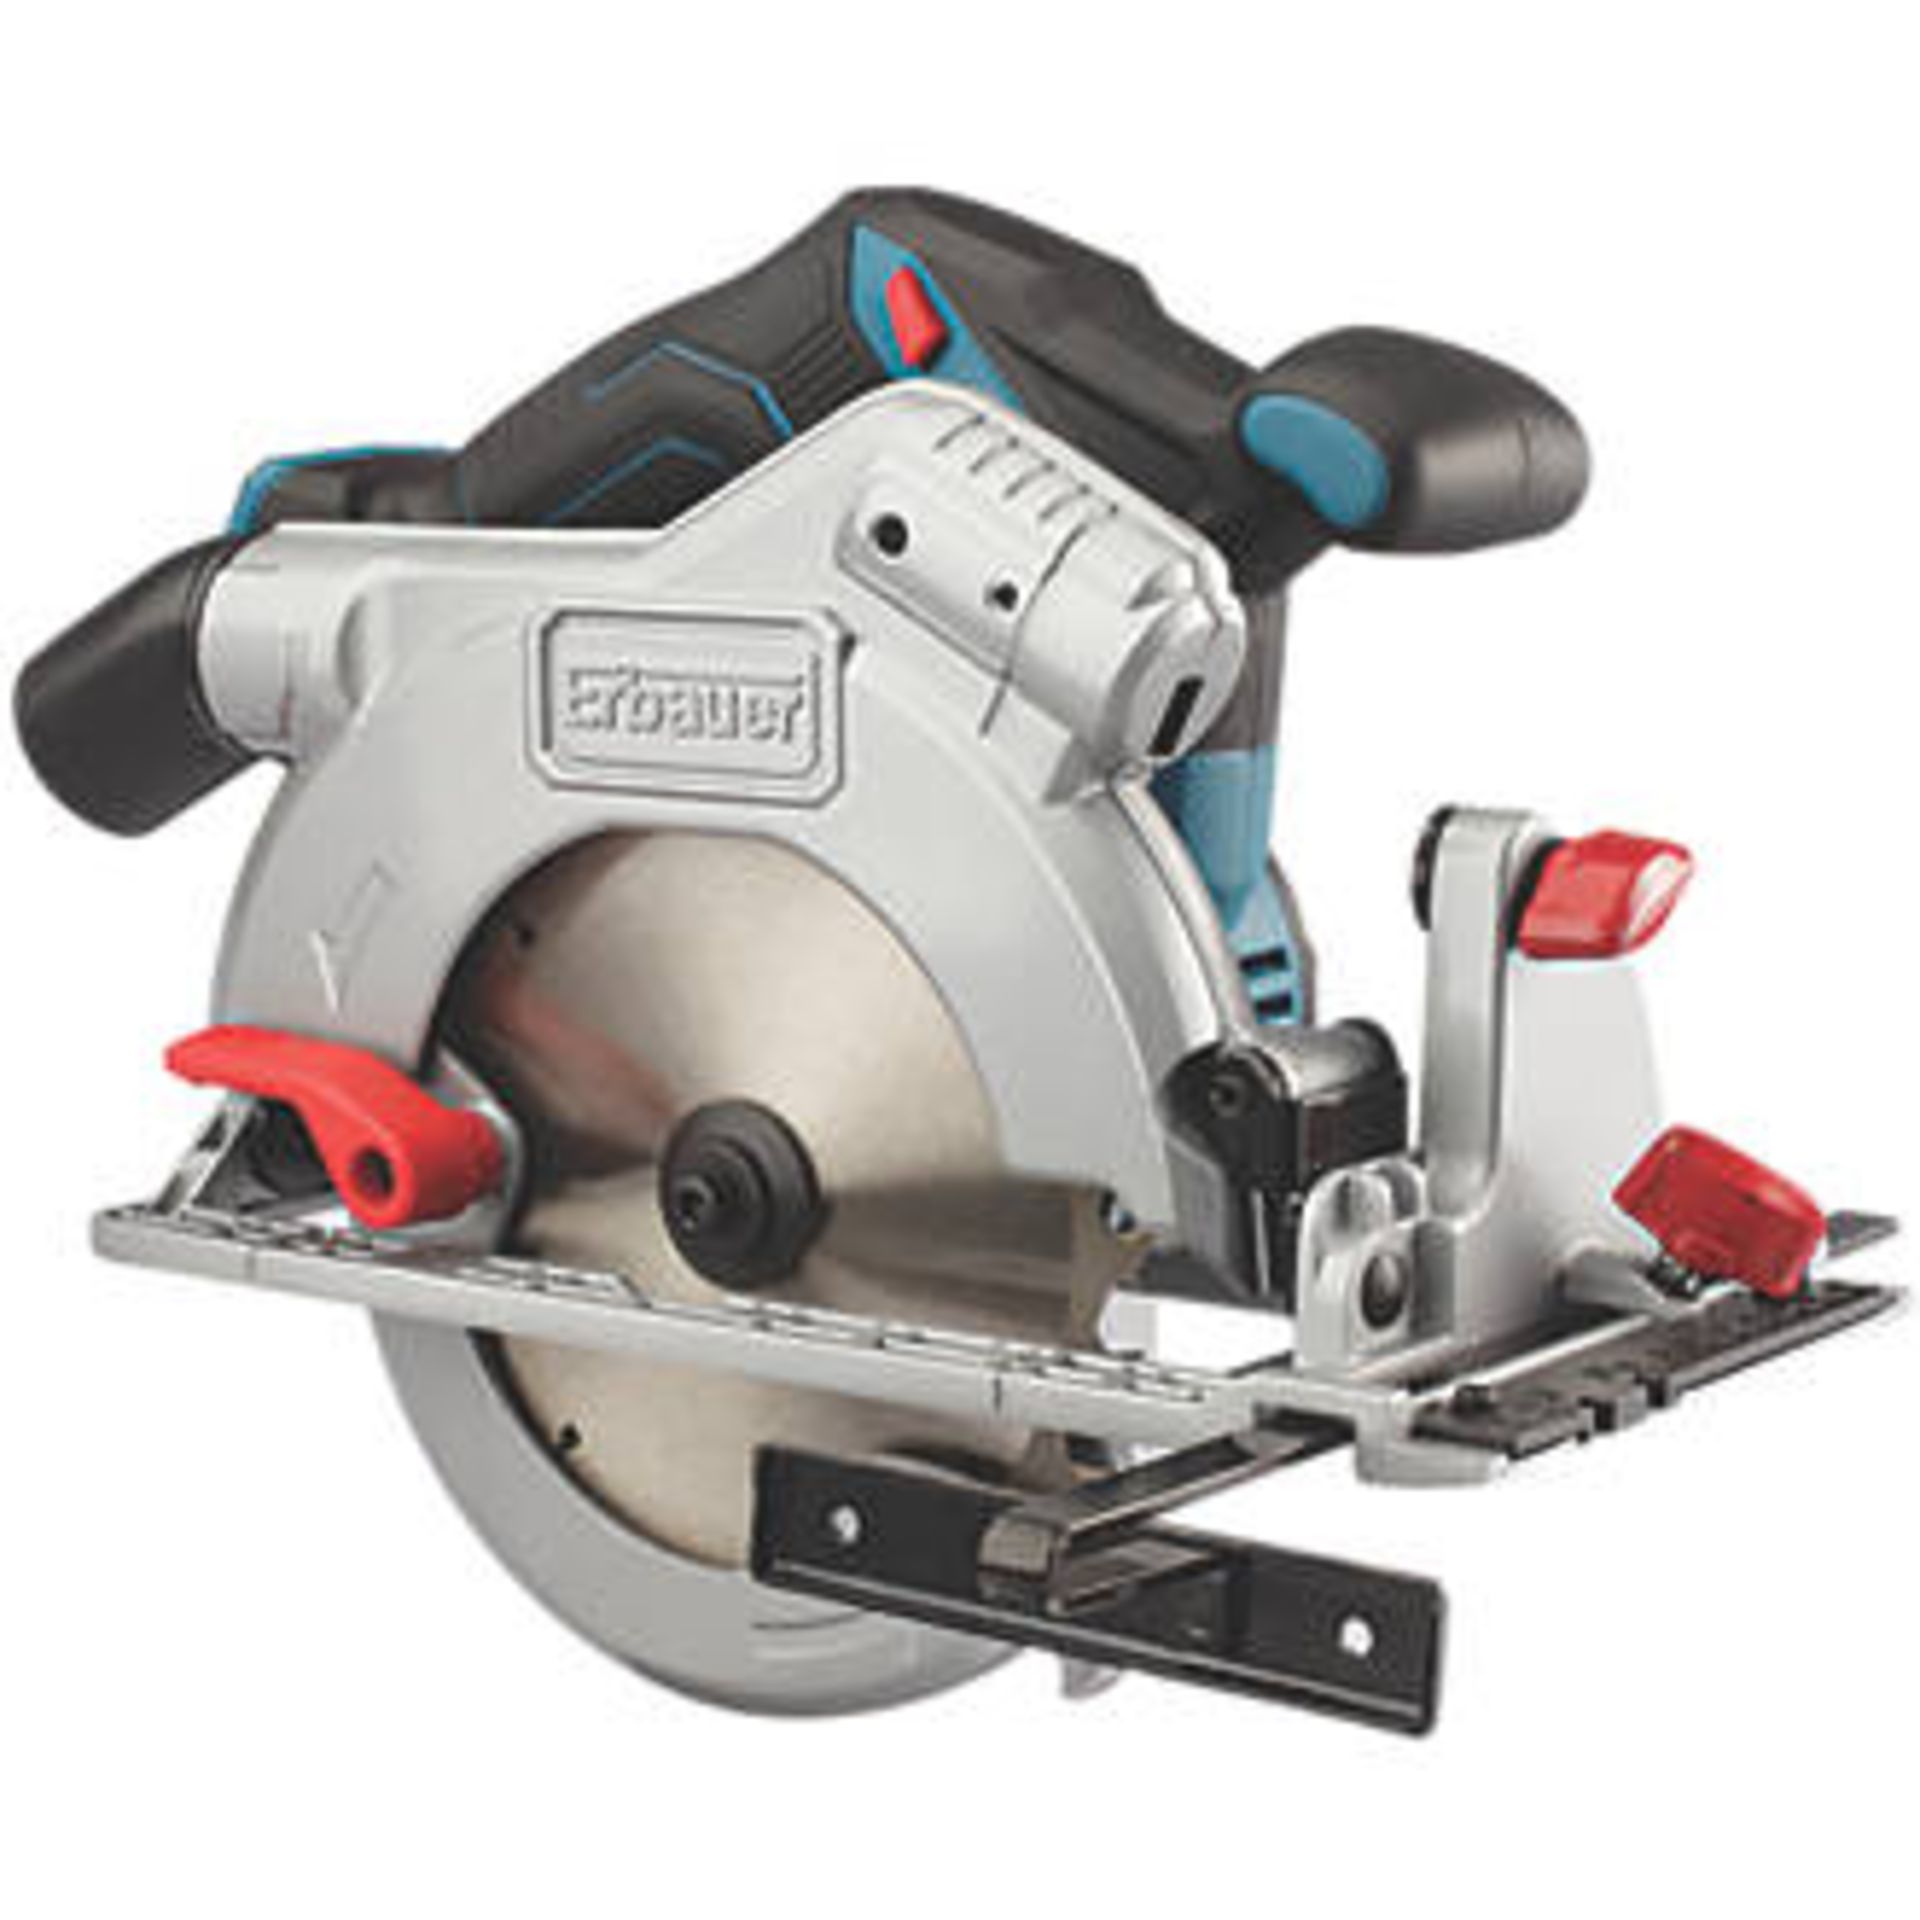 ERBAUER 1400W ECS1400 CIRCULAR SAW RRP £80Condition ReportAppraisal Available on Request- All